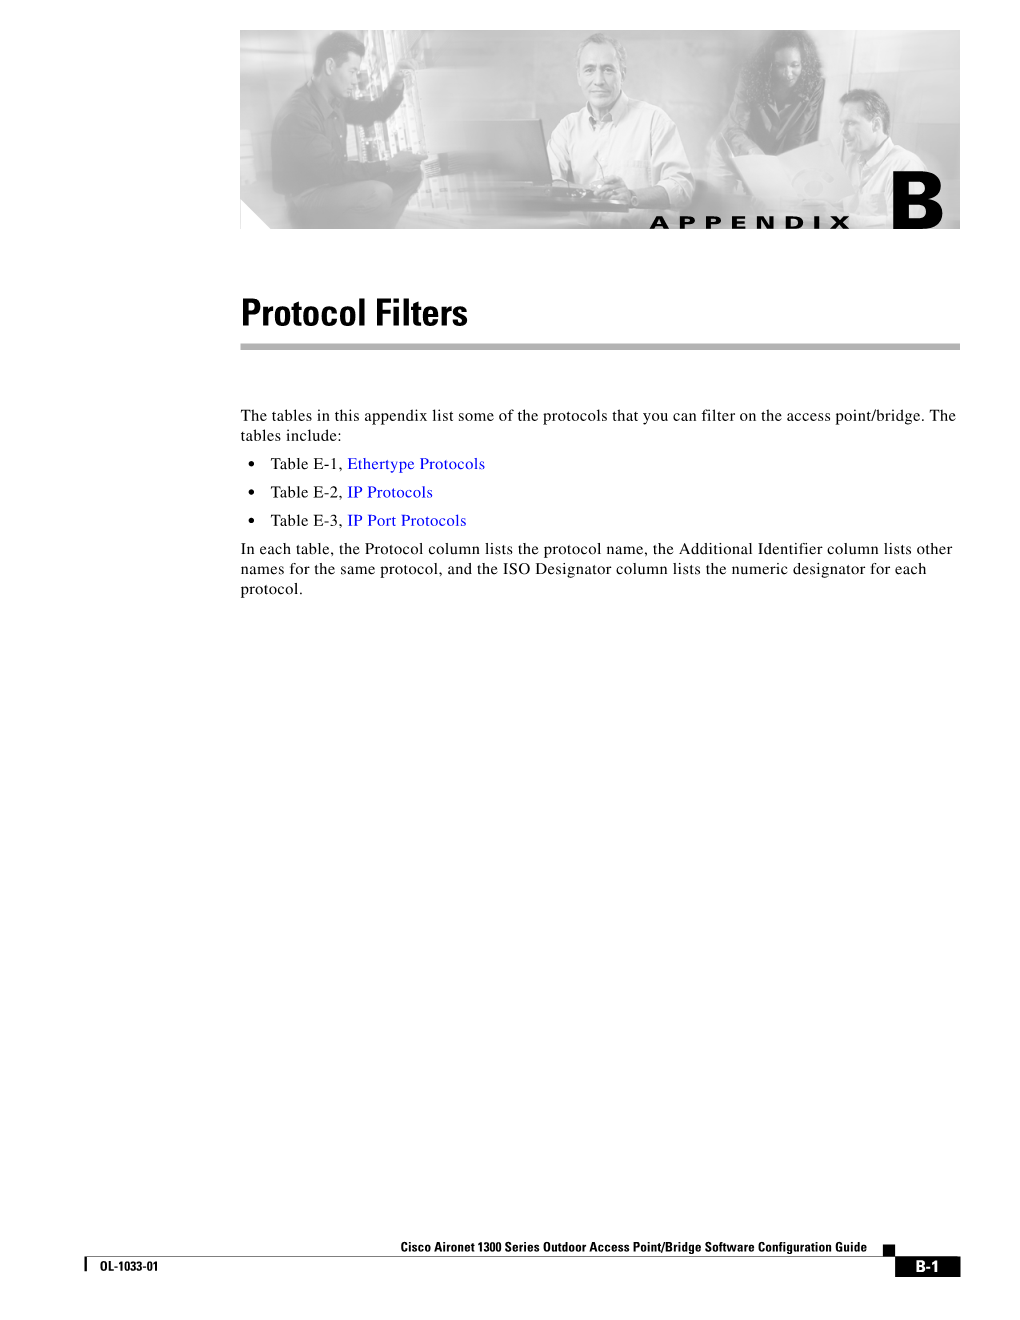 Protocol Filters